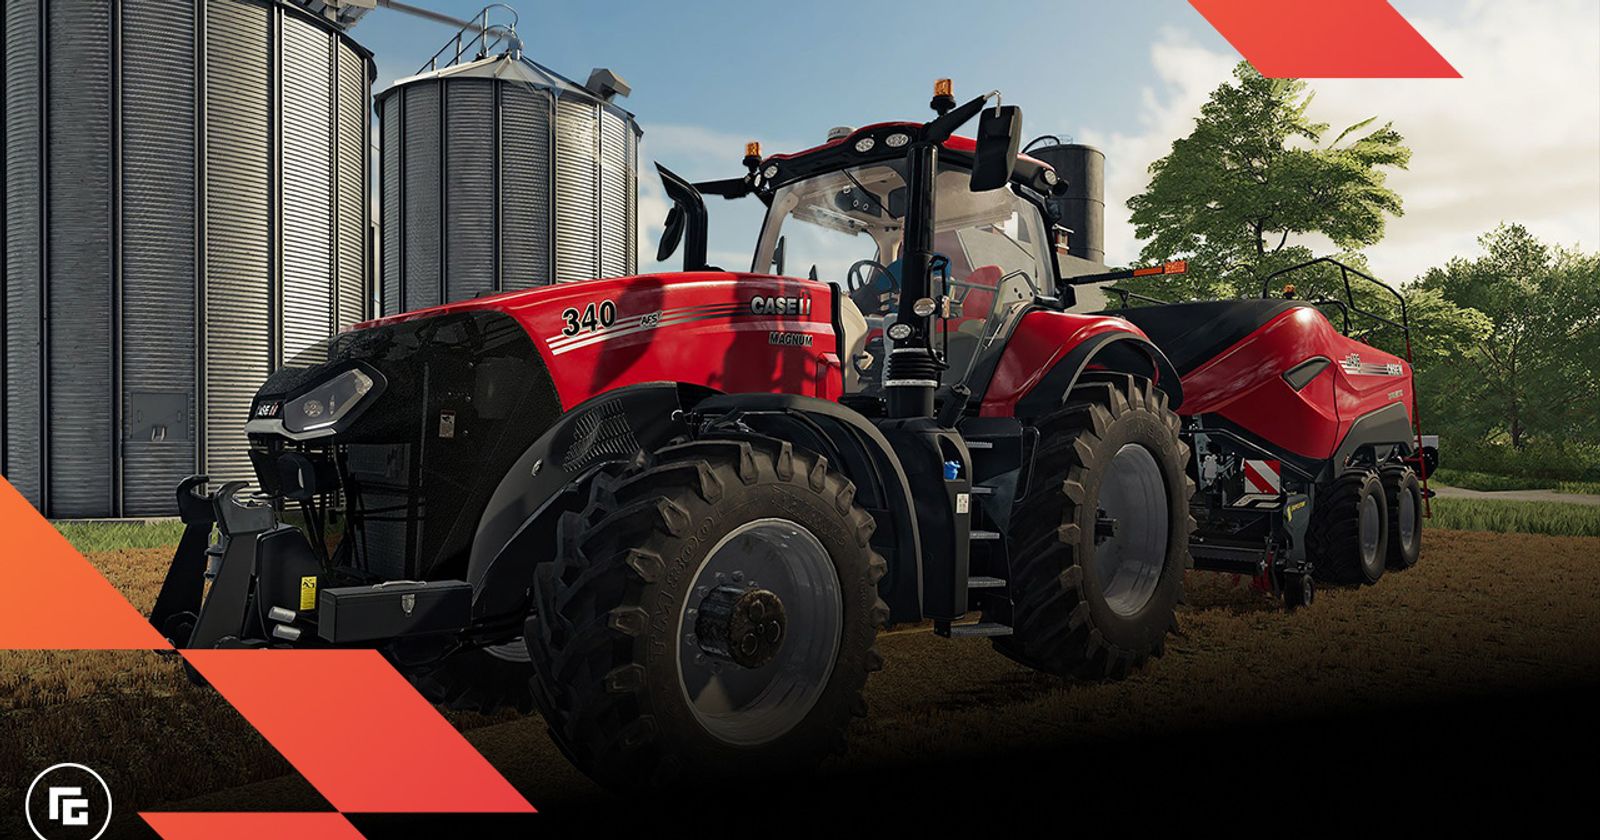 Buy Farming Simulator 22 from the Humble Store